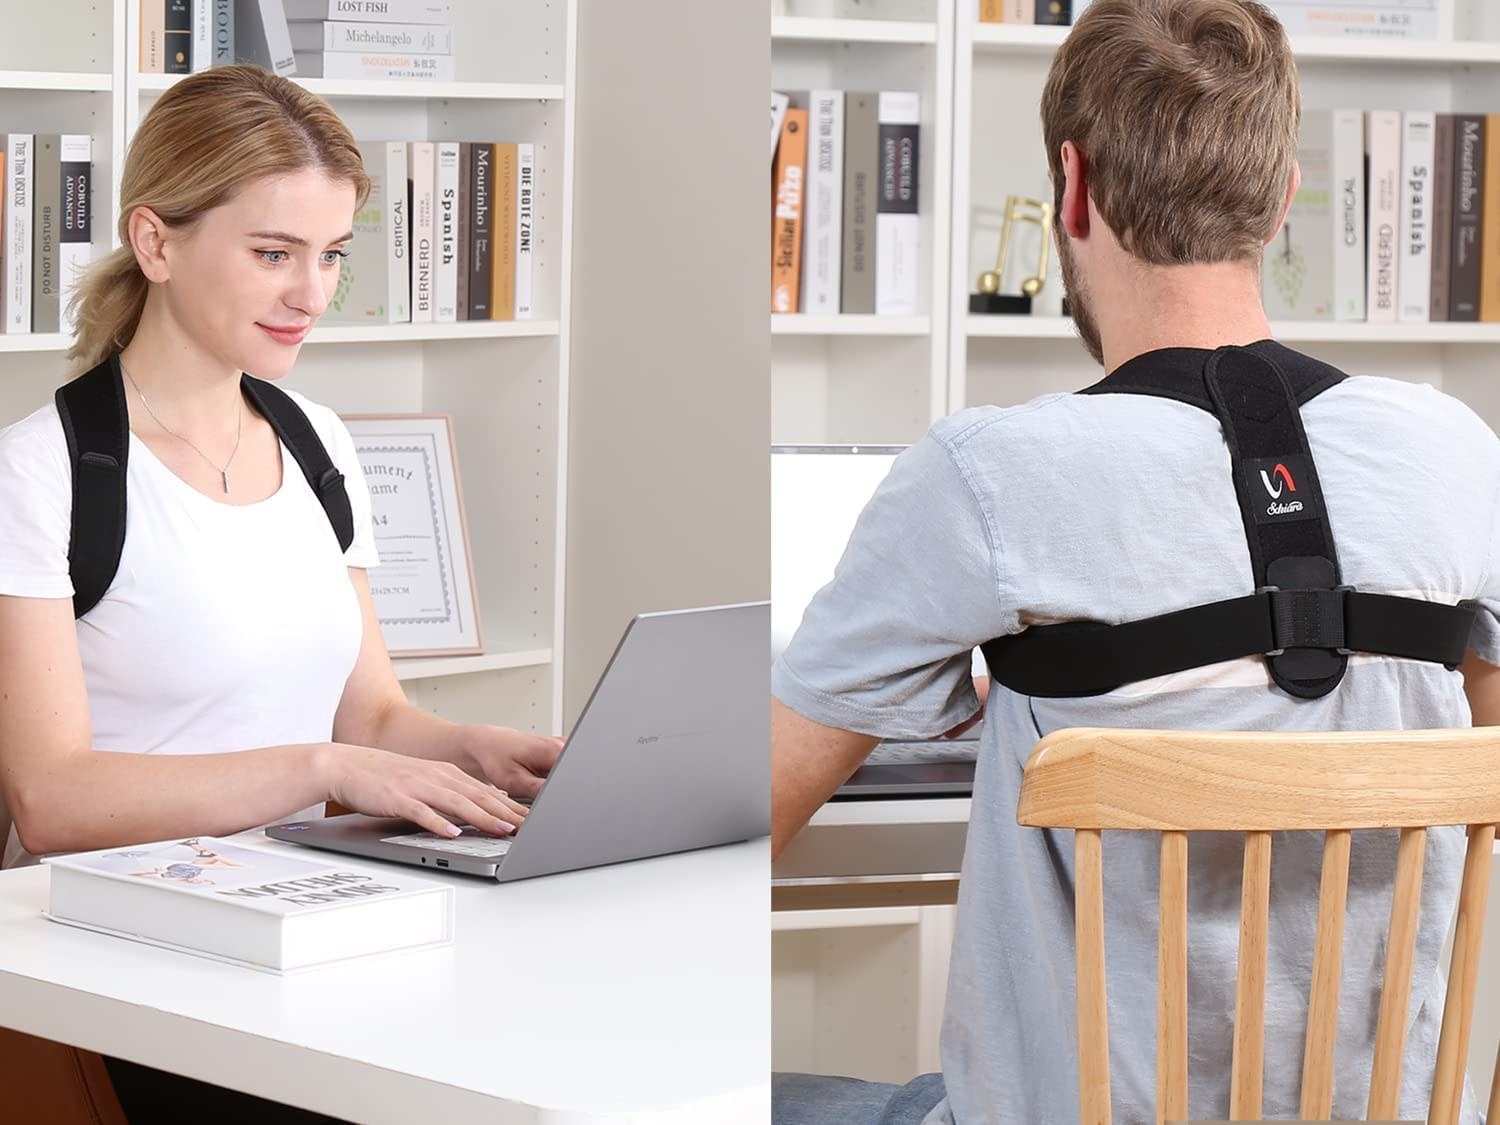 Two people wearing the posture corrector while sitting at a desk